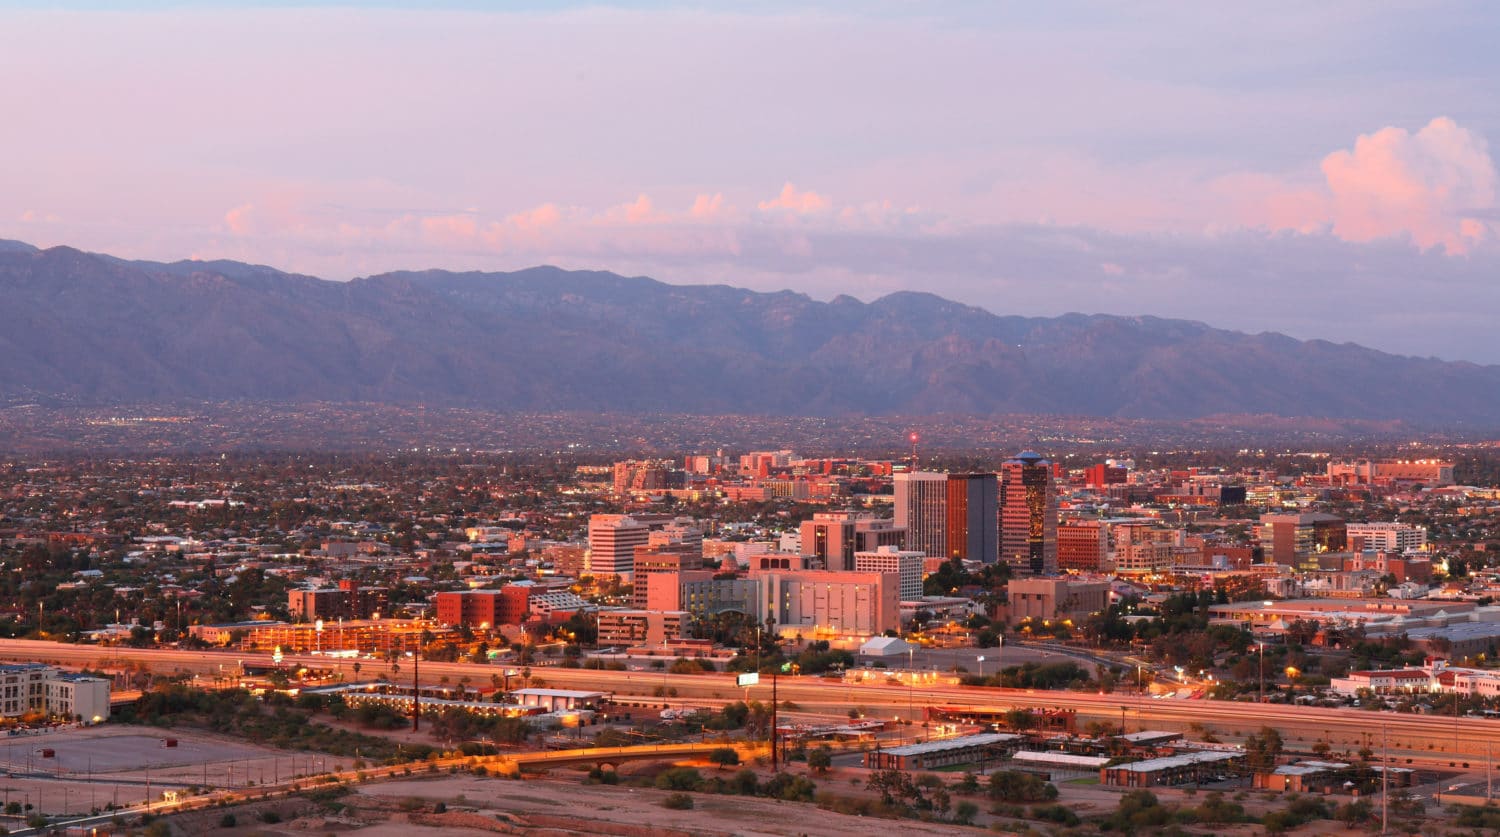 Photo of Tucson with Mt. Lemmon in the background.